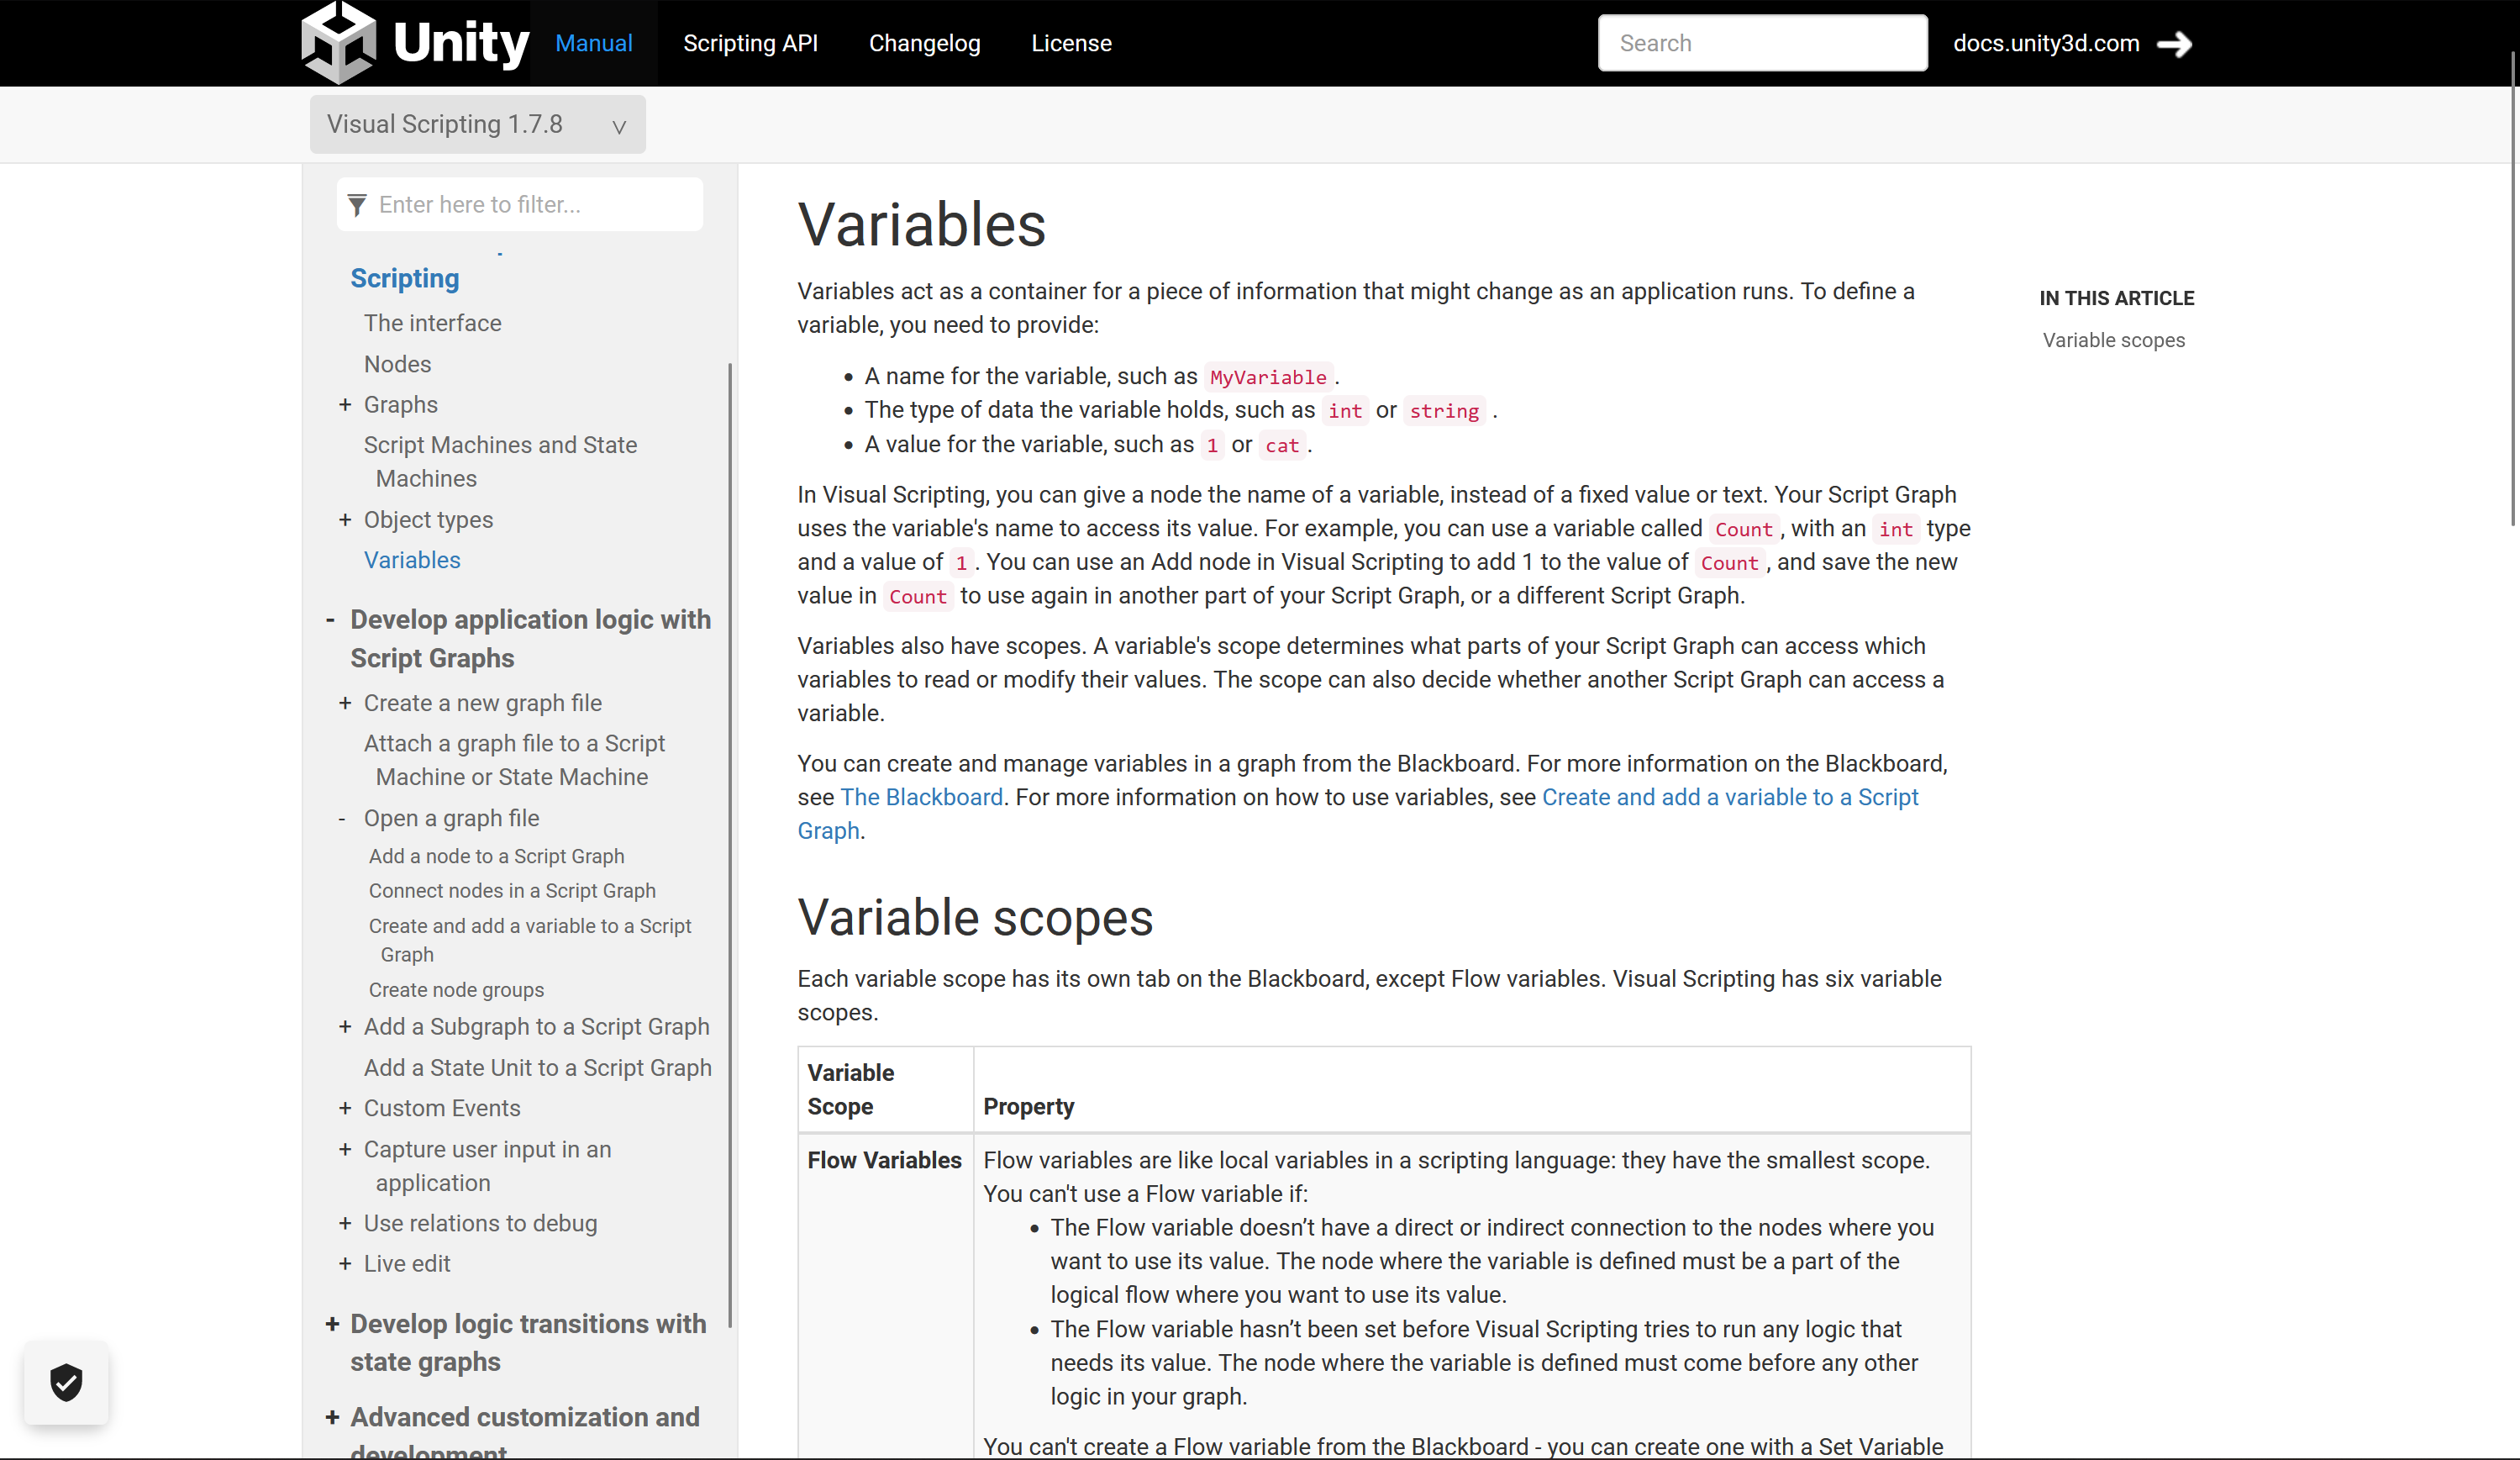 An image of the "after" of the Visual Scripting documentation. New information on variables!